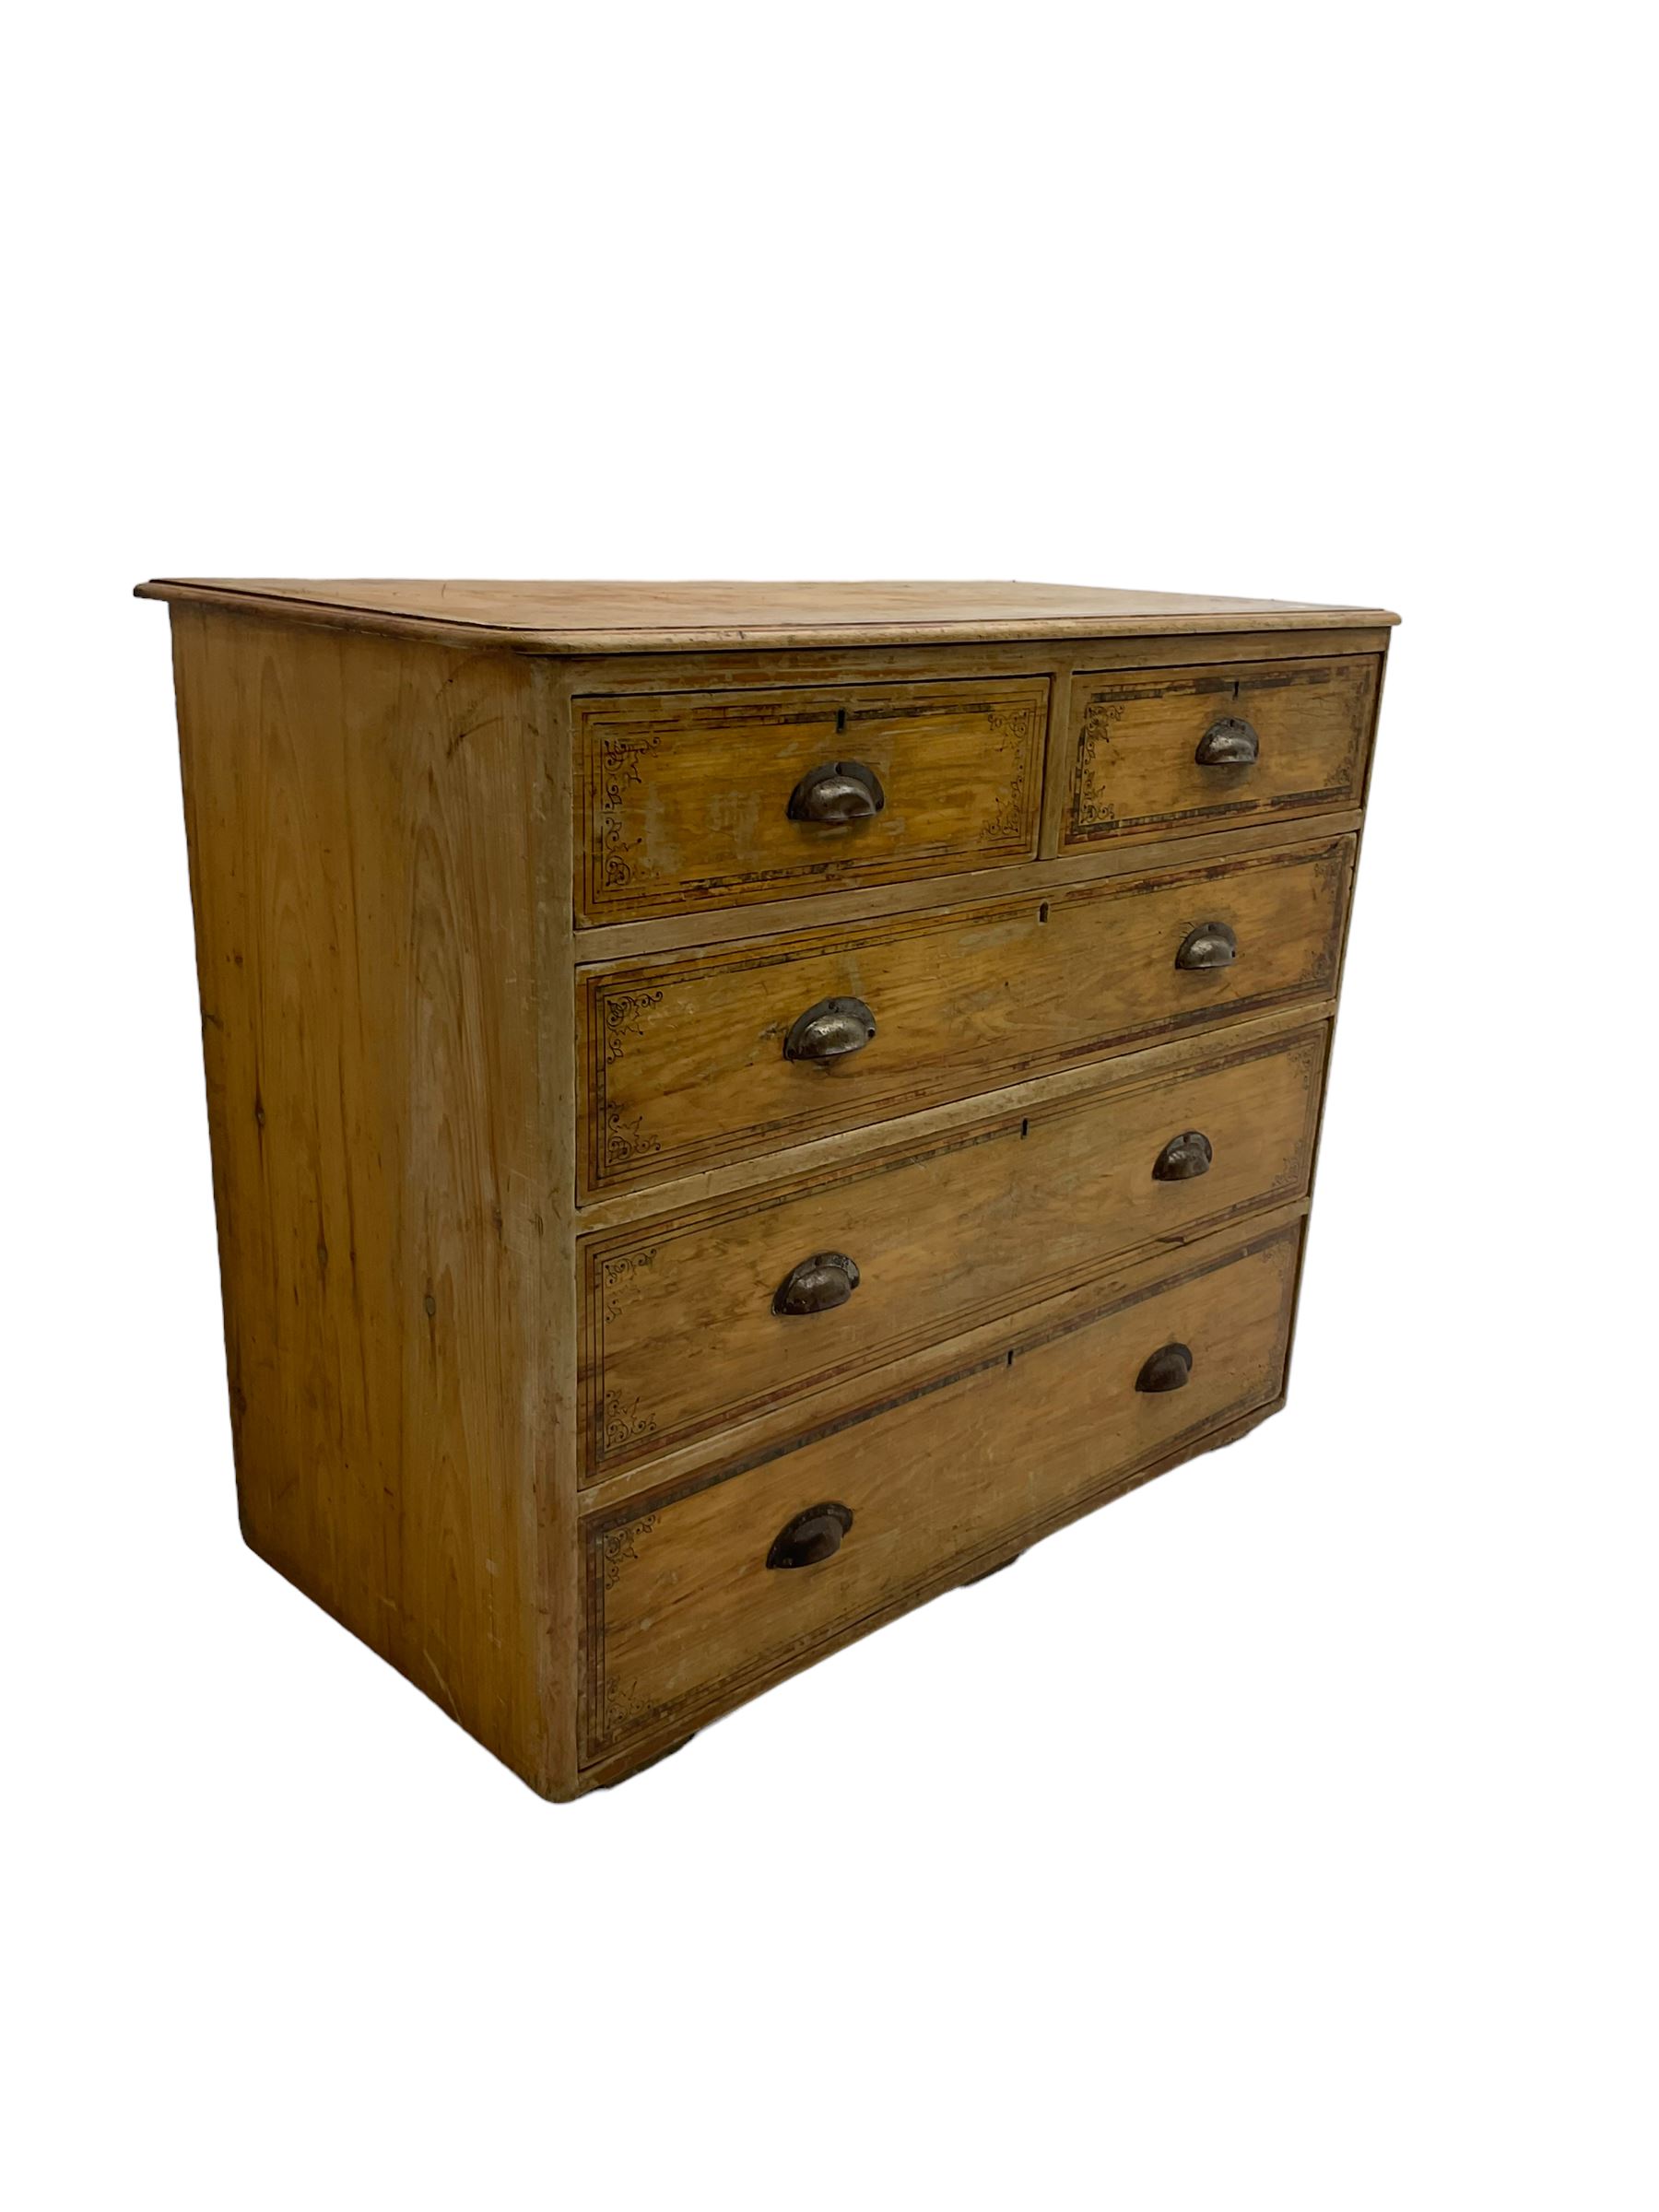 Late 19th century painted pine chest - Image 3 of 6